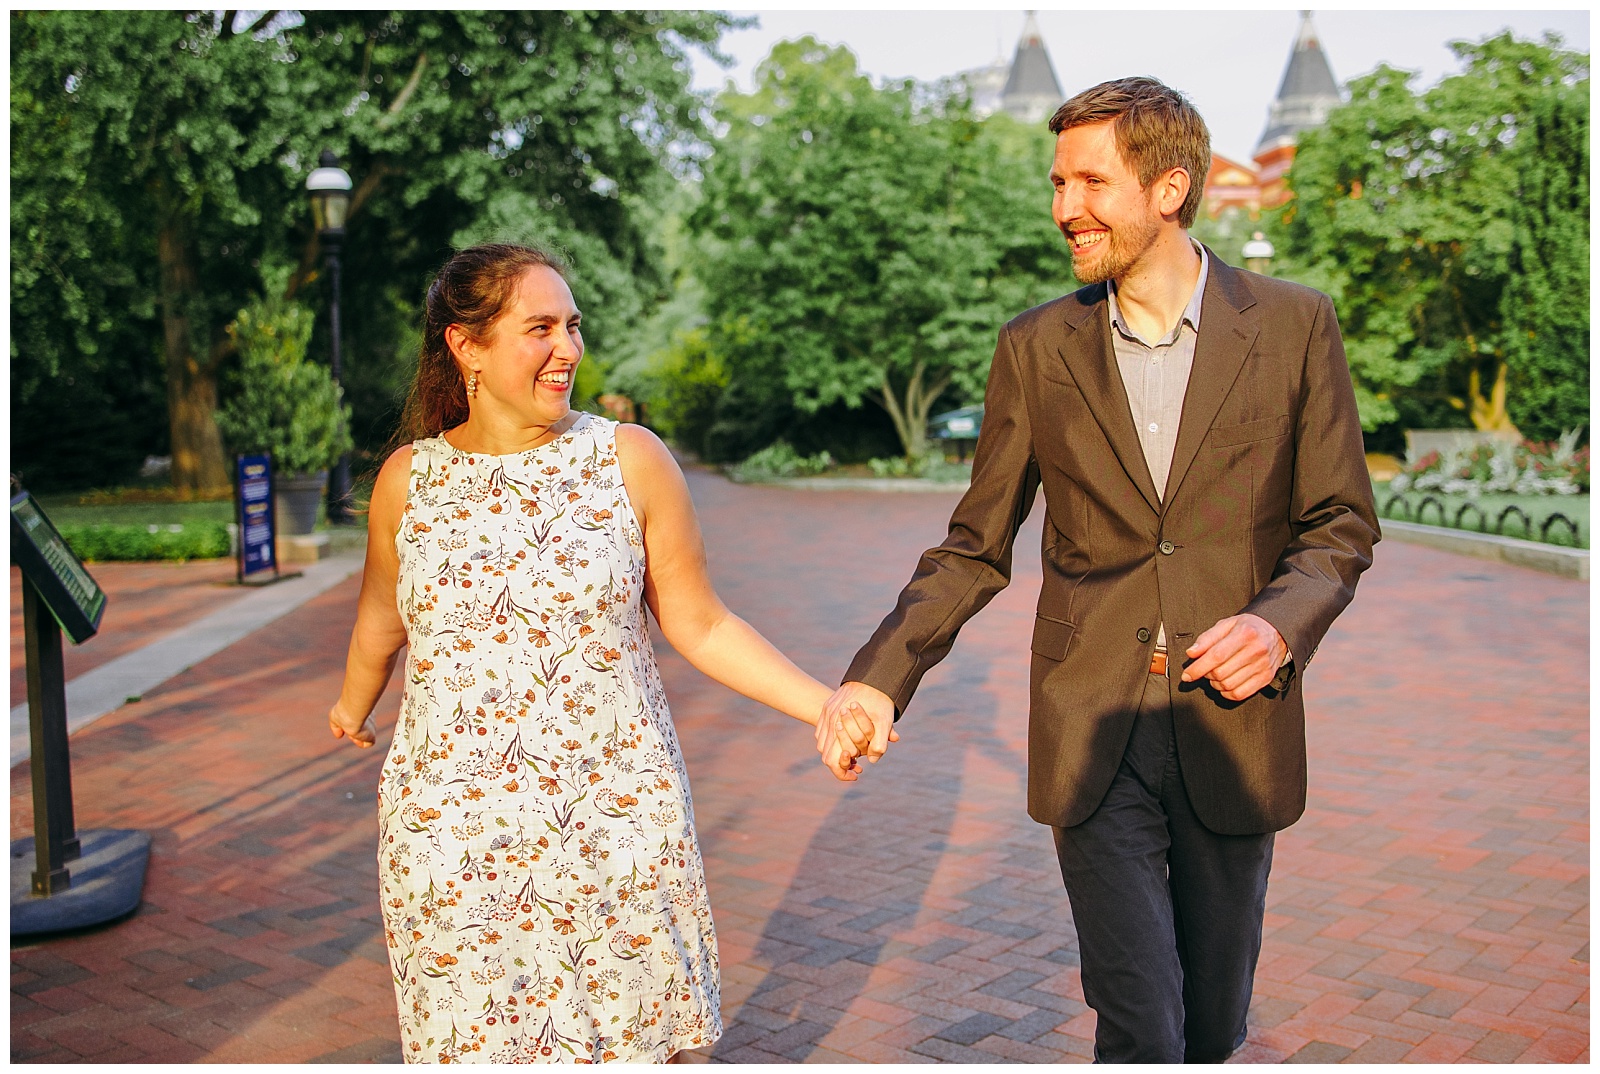 Engagement photo session at Enid A. Haupt Garden